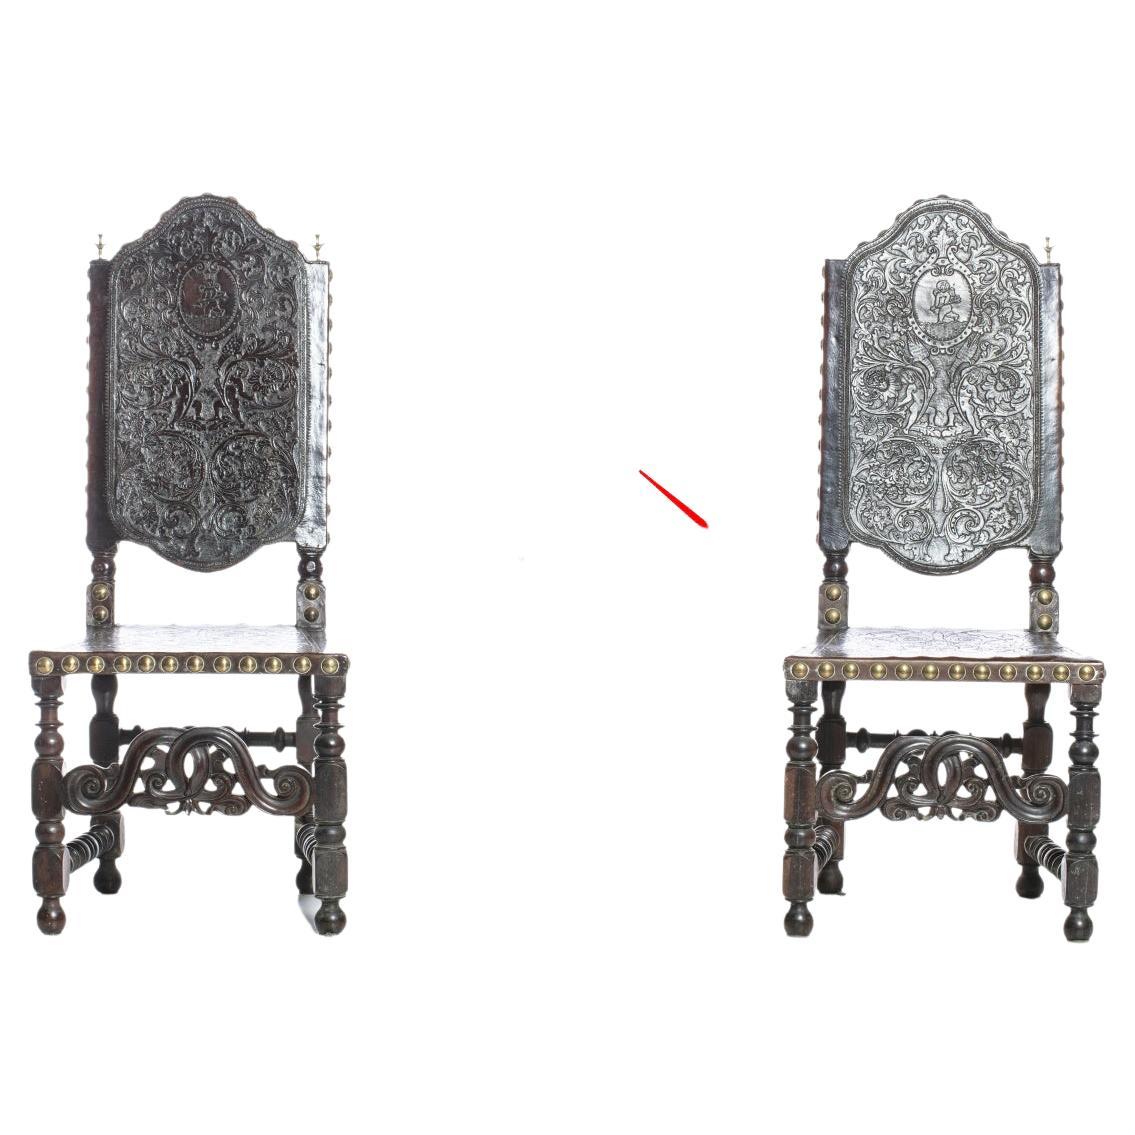 Pair of 18th Century Portuguese Chairs in Kingwood